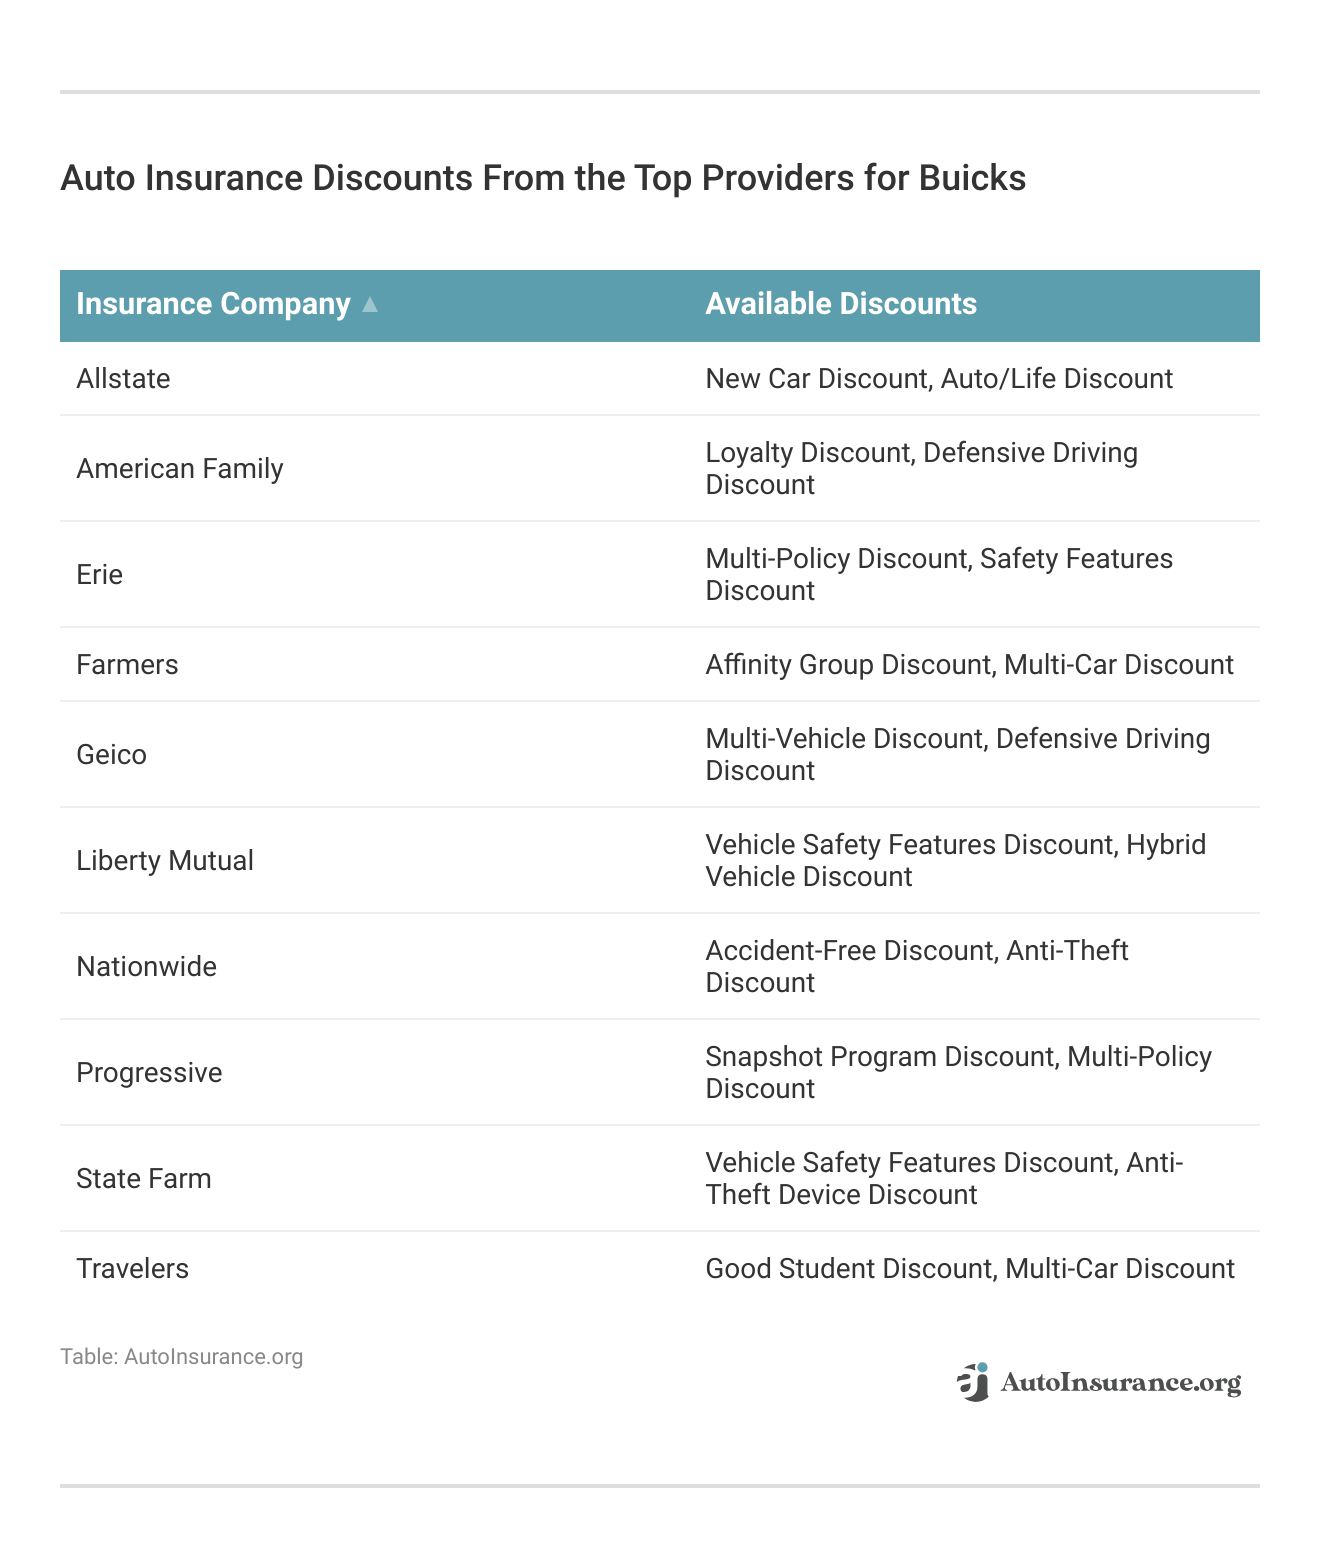 <h3>Auto Insurance Discounts From the Top Providers for Buicks</h3>